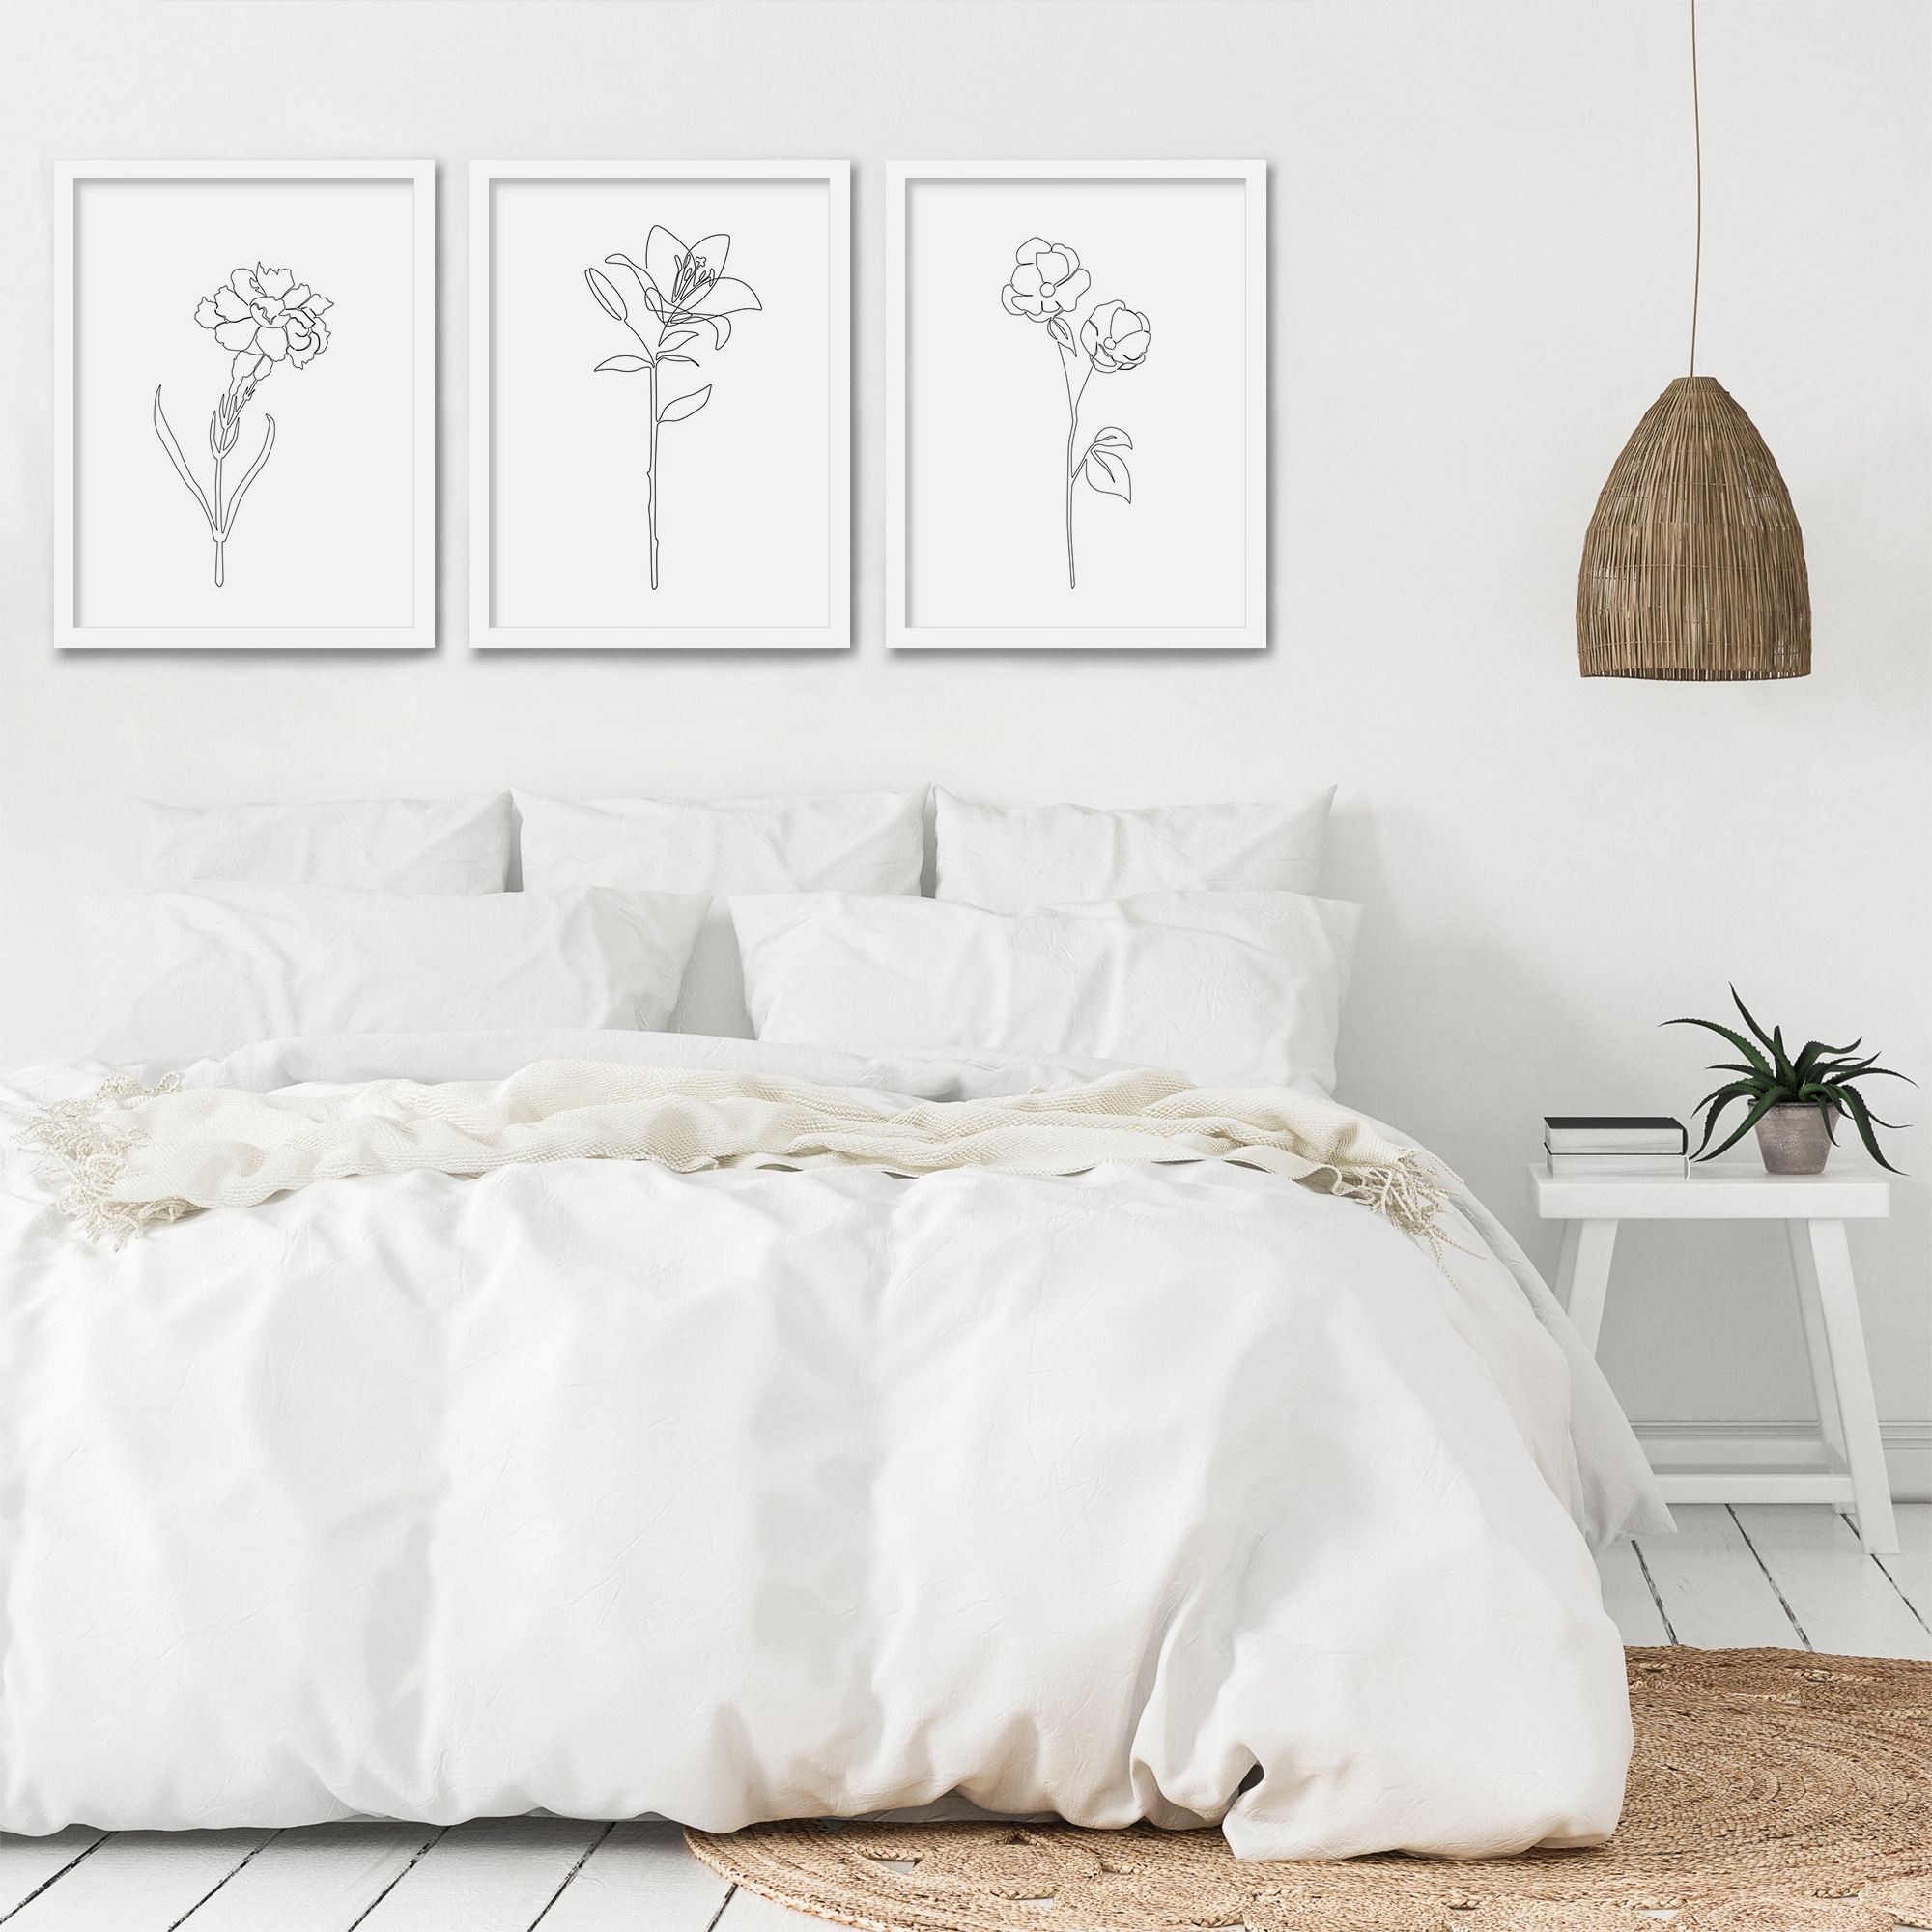 Floral Sketches By Explicit Design 3 Piece Framed Print Wall Art Set